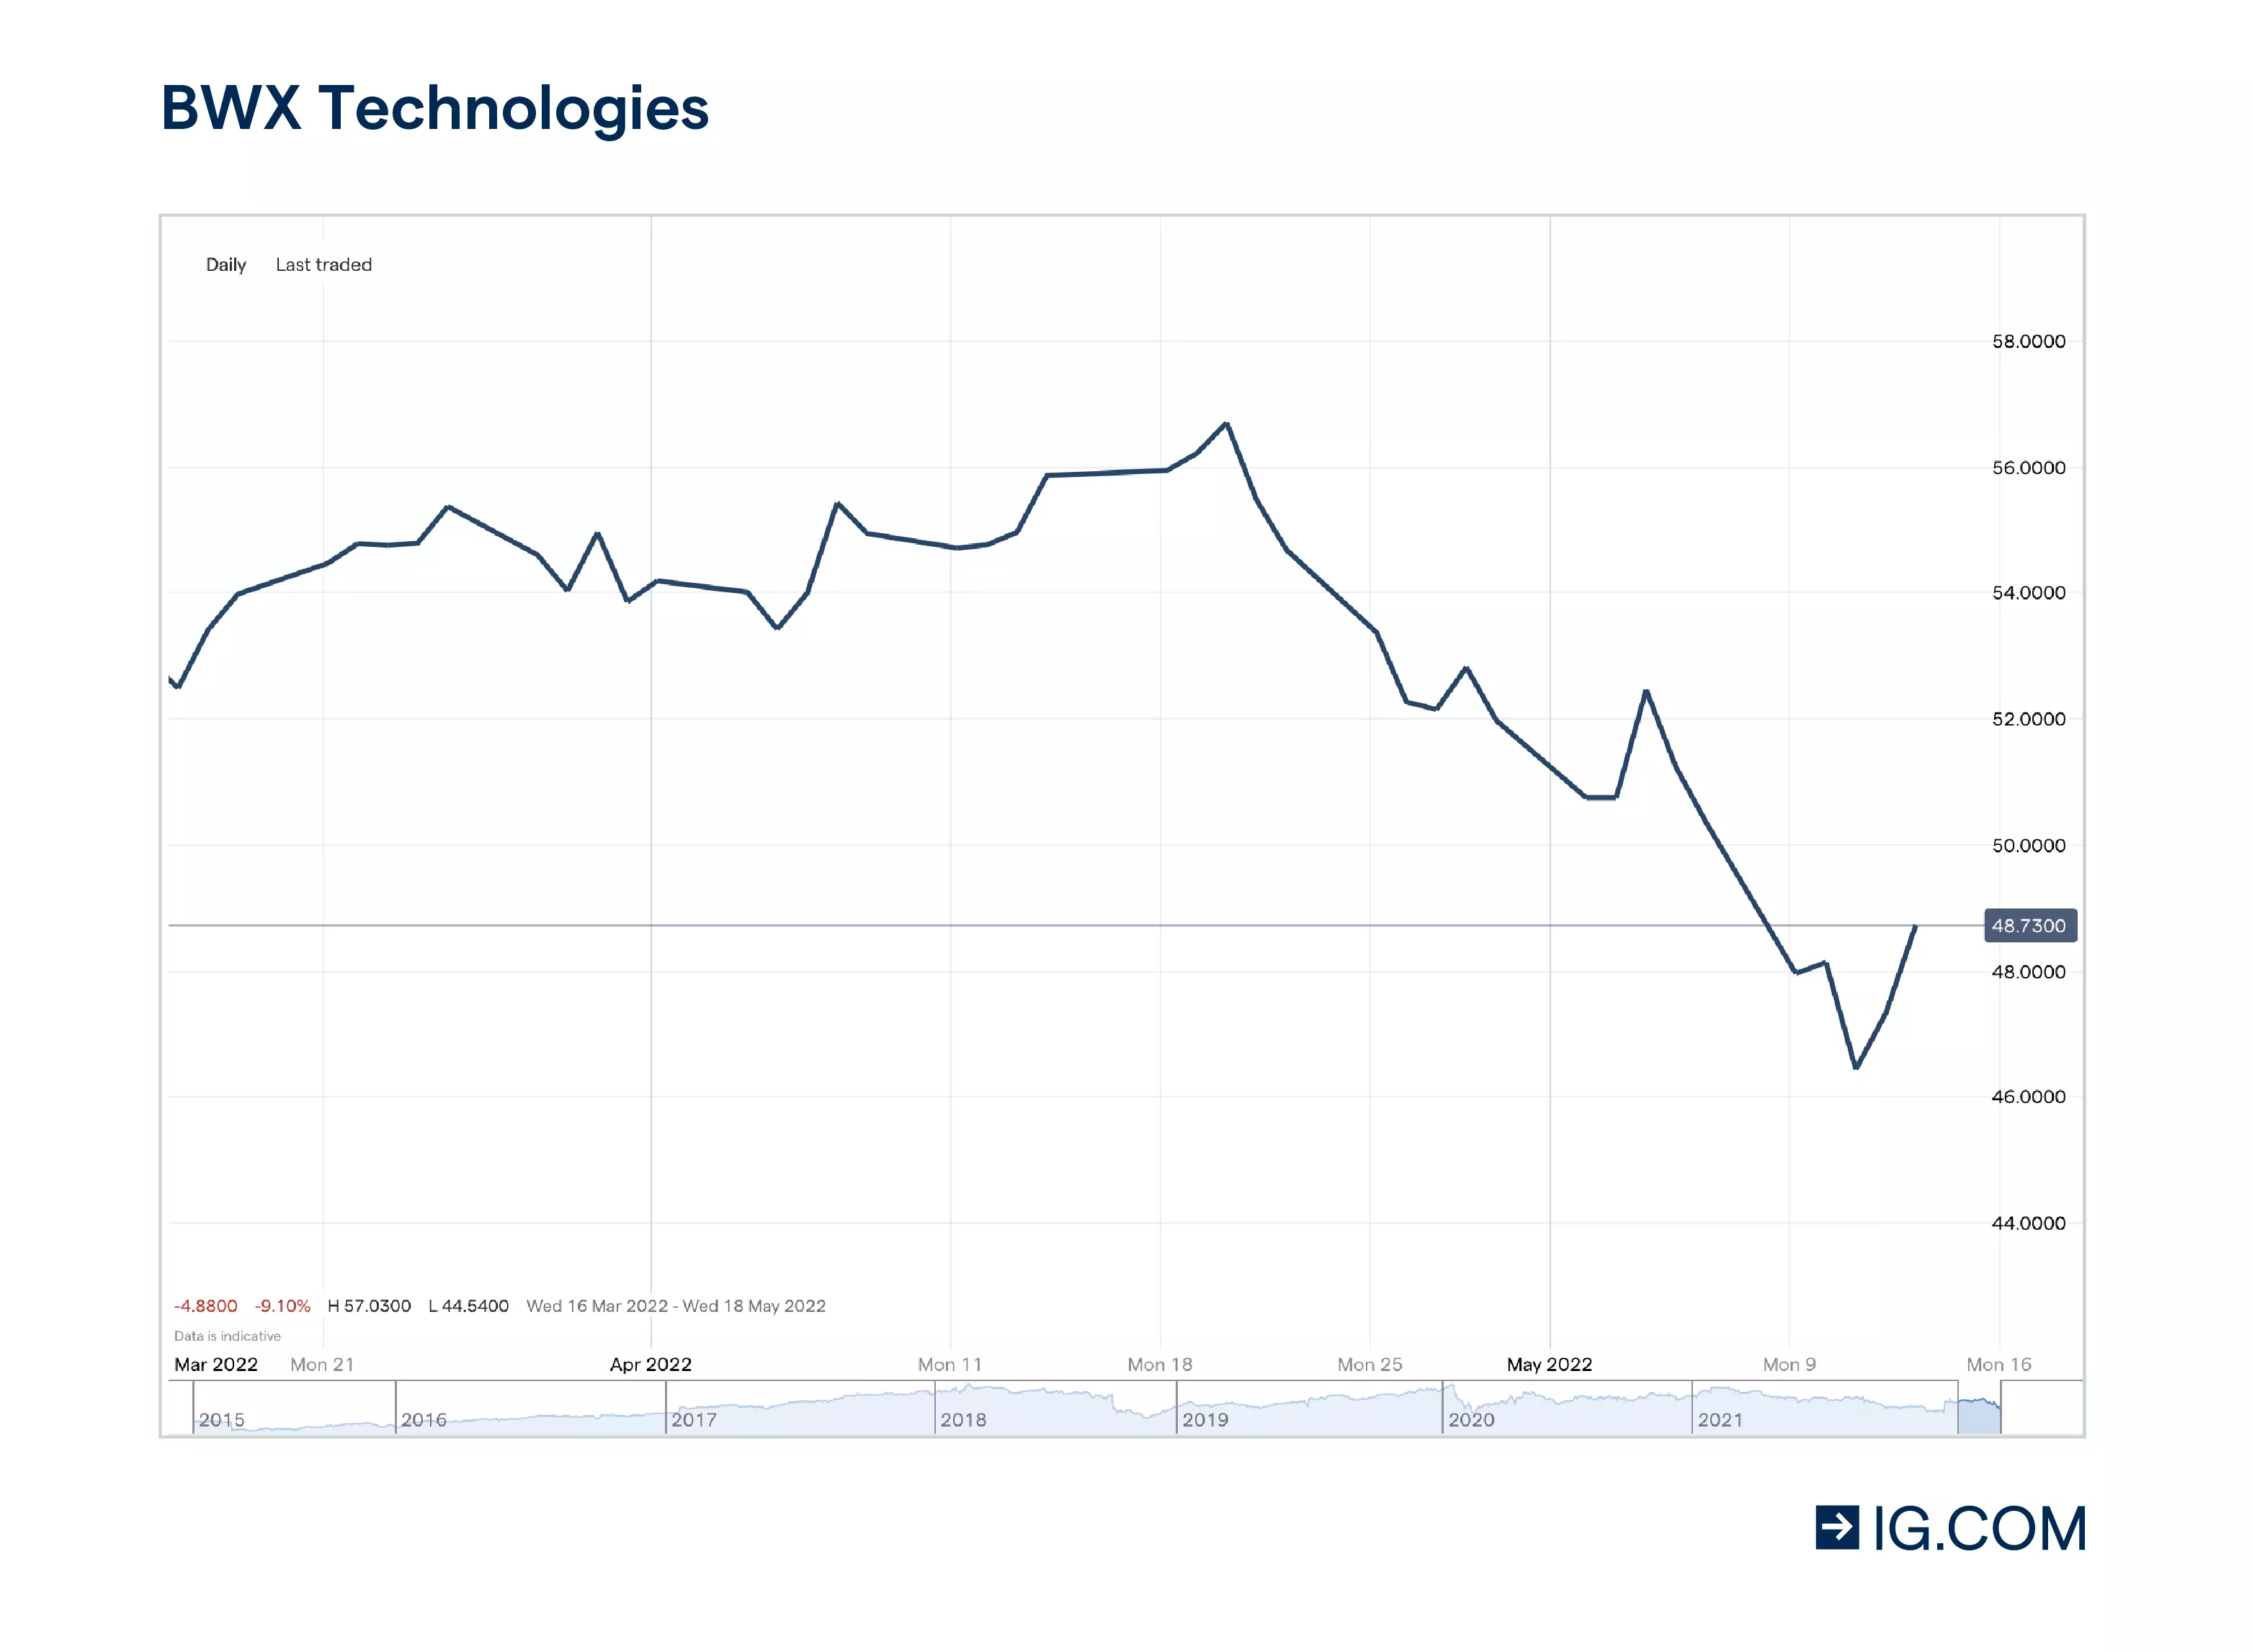 BWX Technologies price chart showing the how the stock has declined from $1.92 a year prior to $1.94 per share